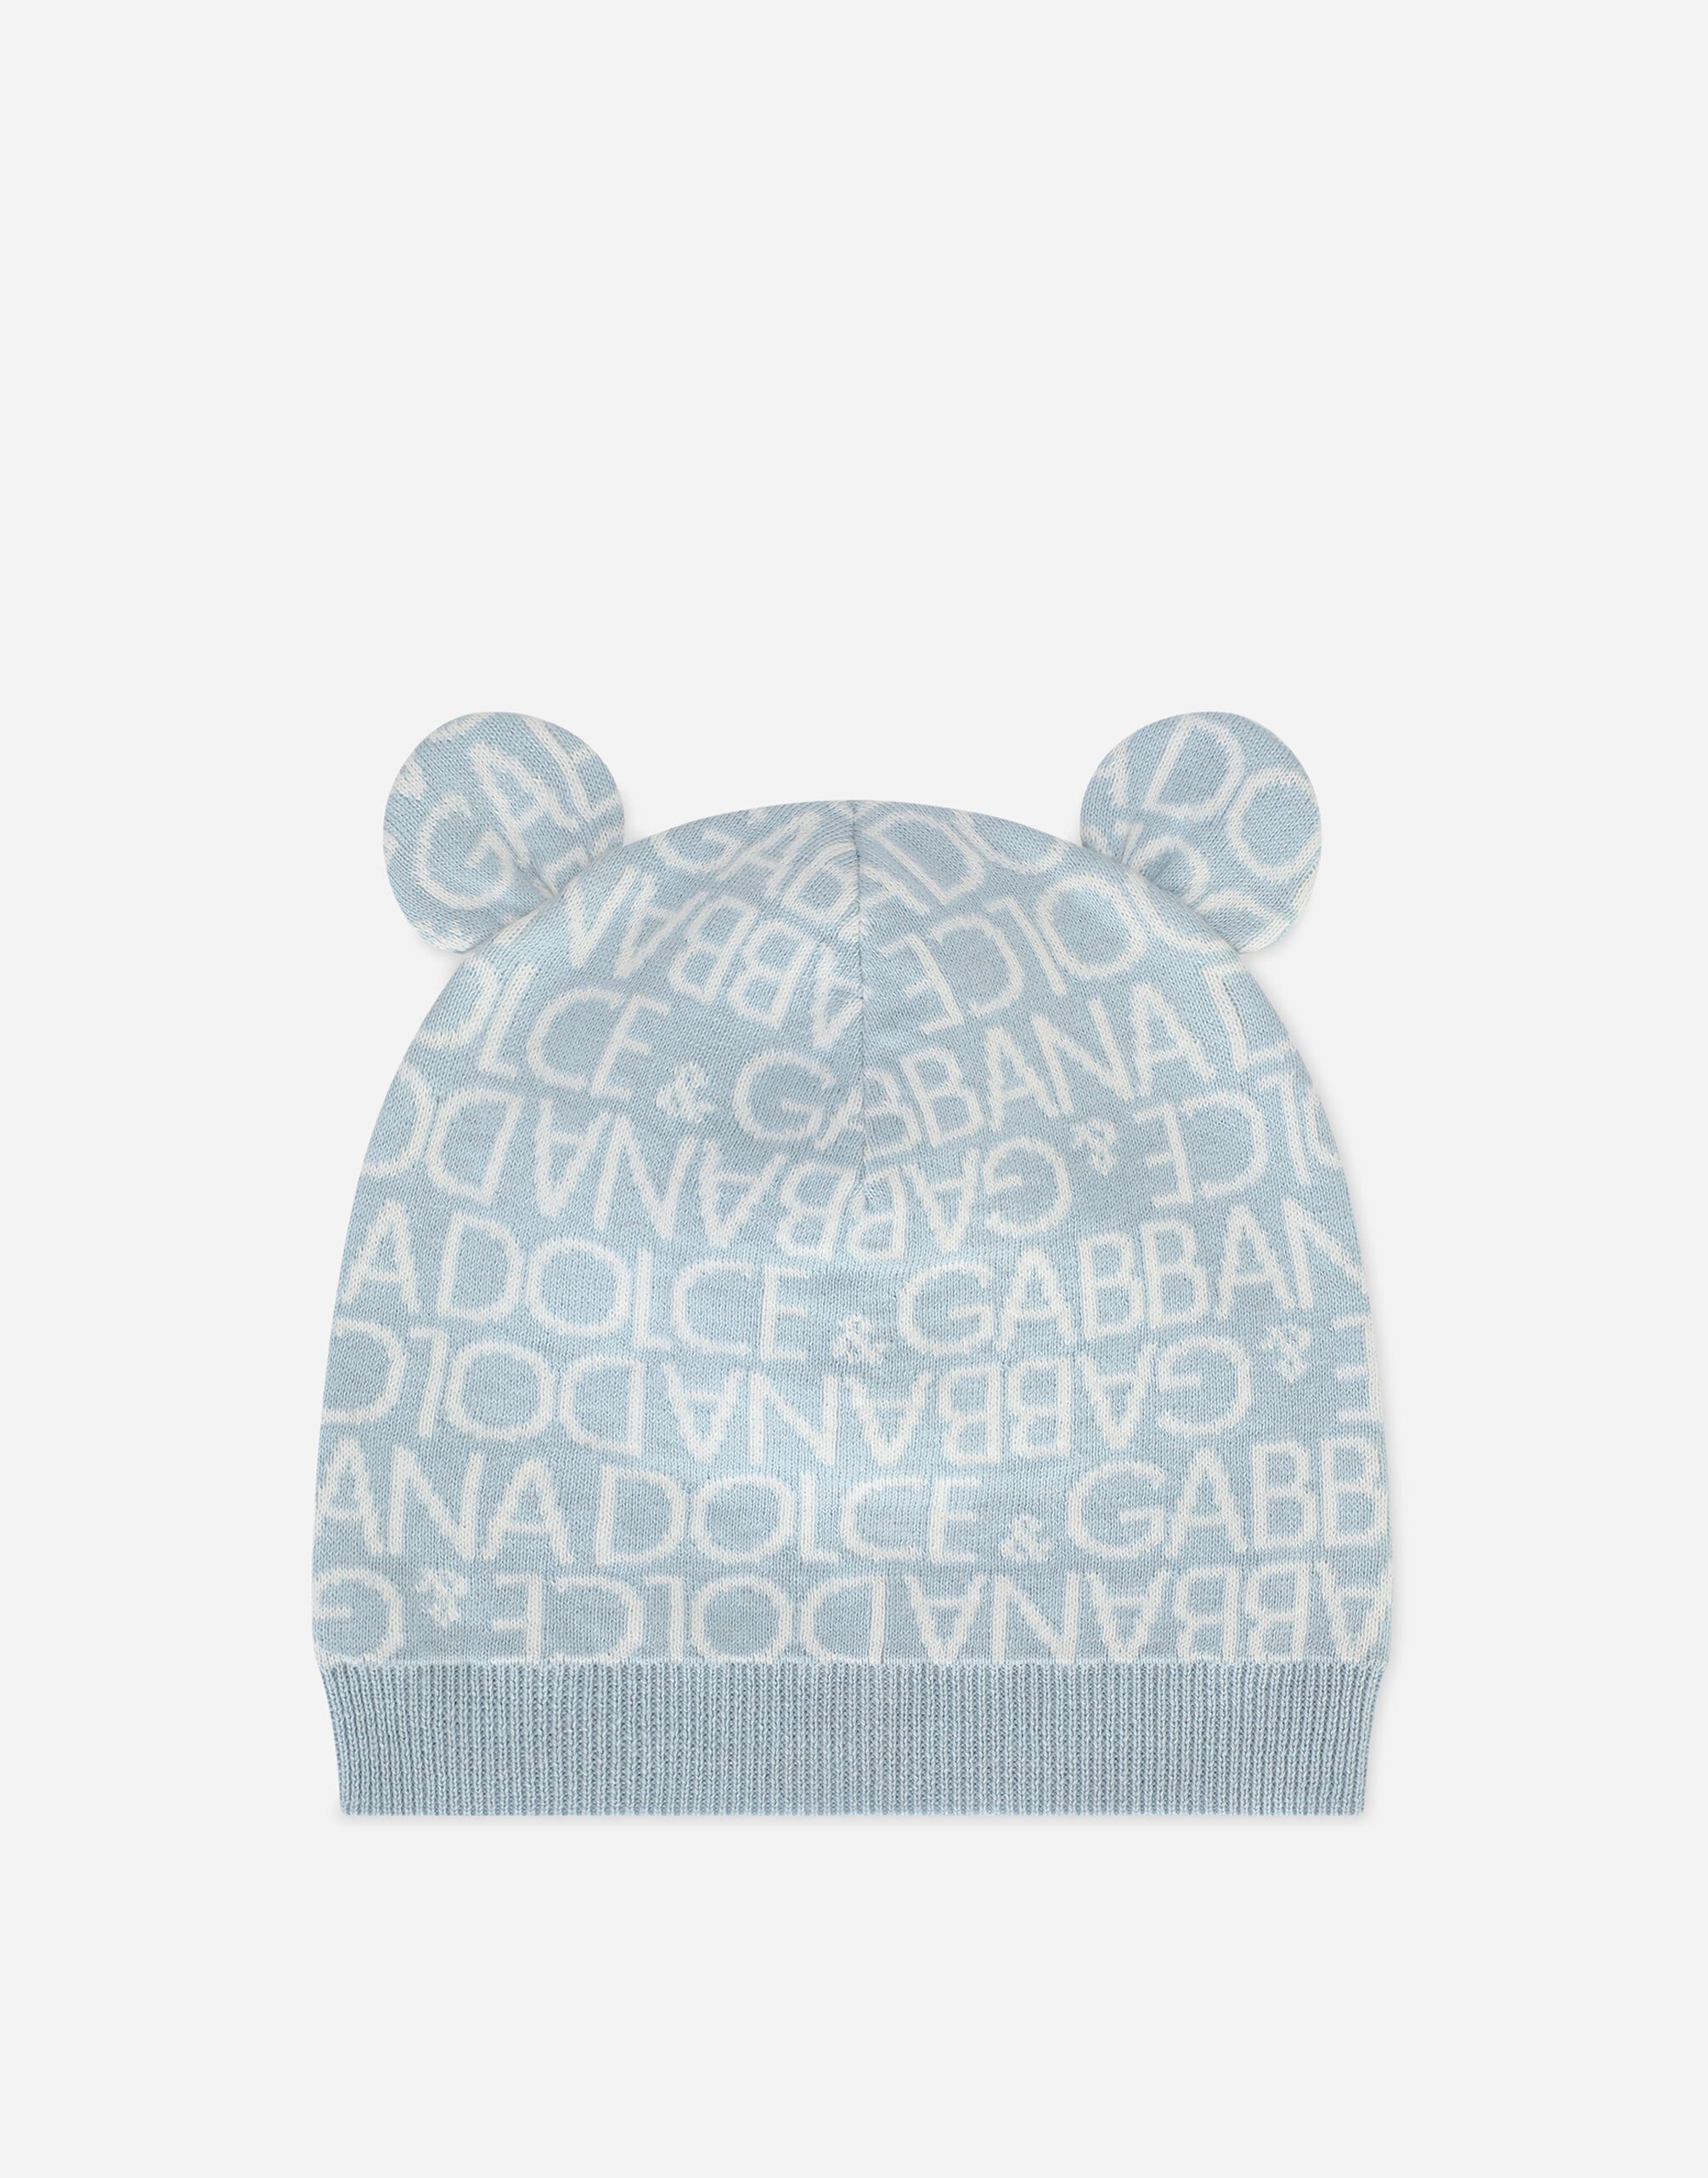 DolceGabbanaSpa Knit hat with jacquard logo and ears Multicolor L4JWFNHS7MN